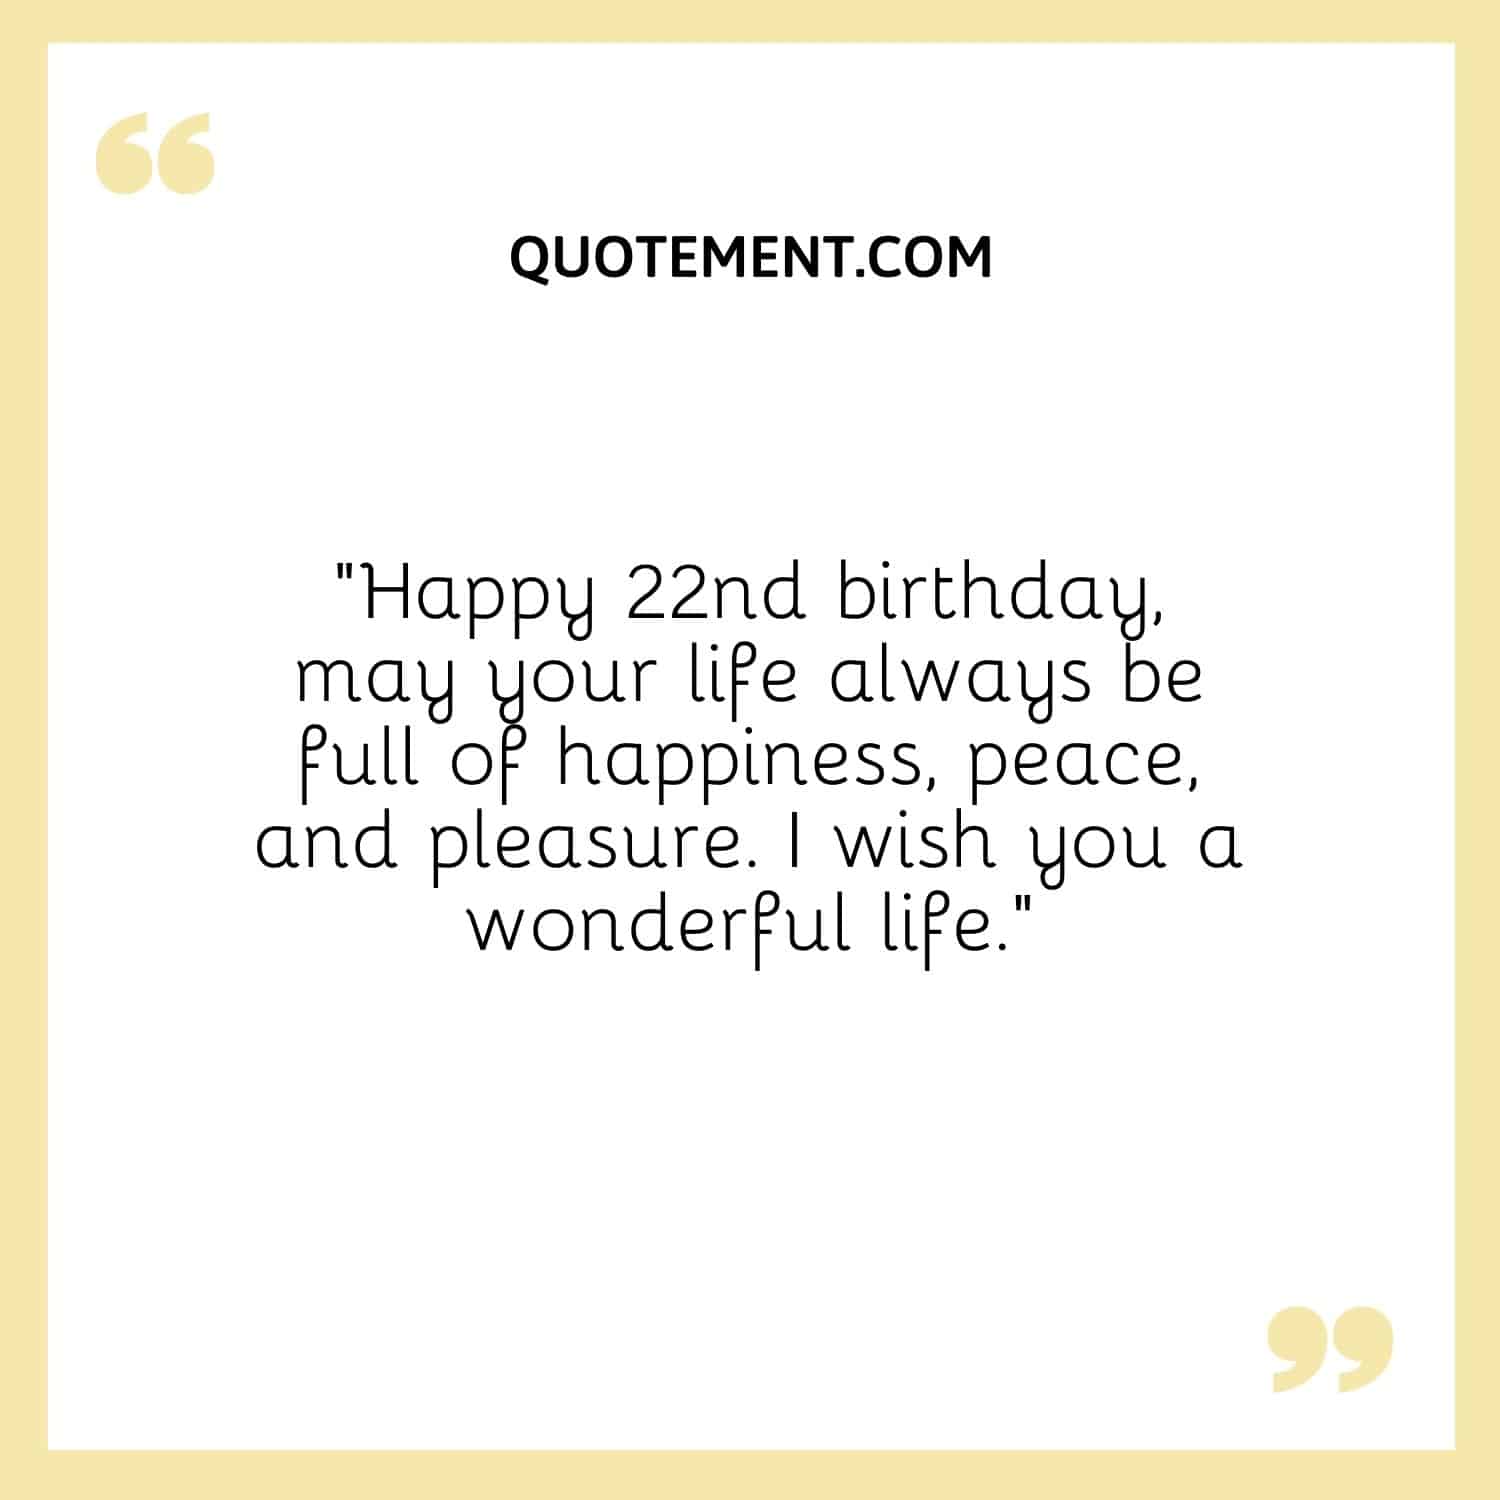 160 Adorable 22nd Birthday Quotes You Will Absolutely Love